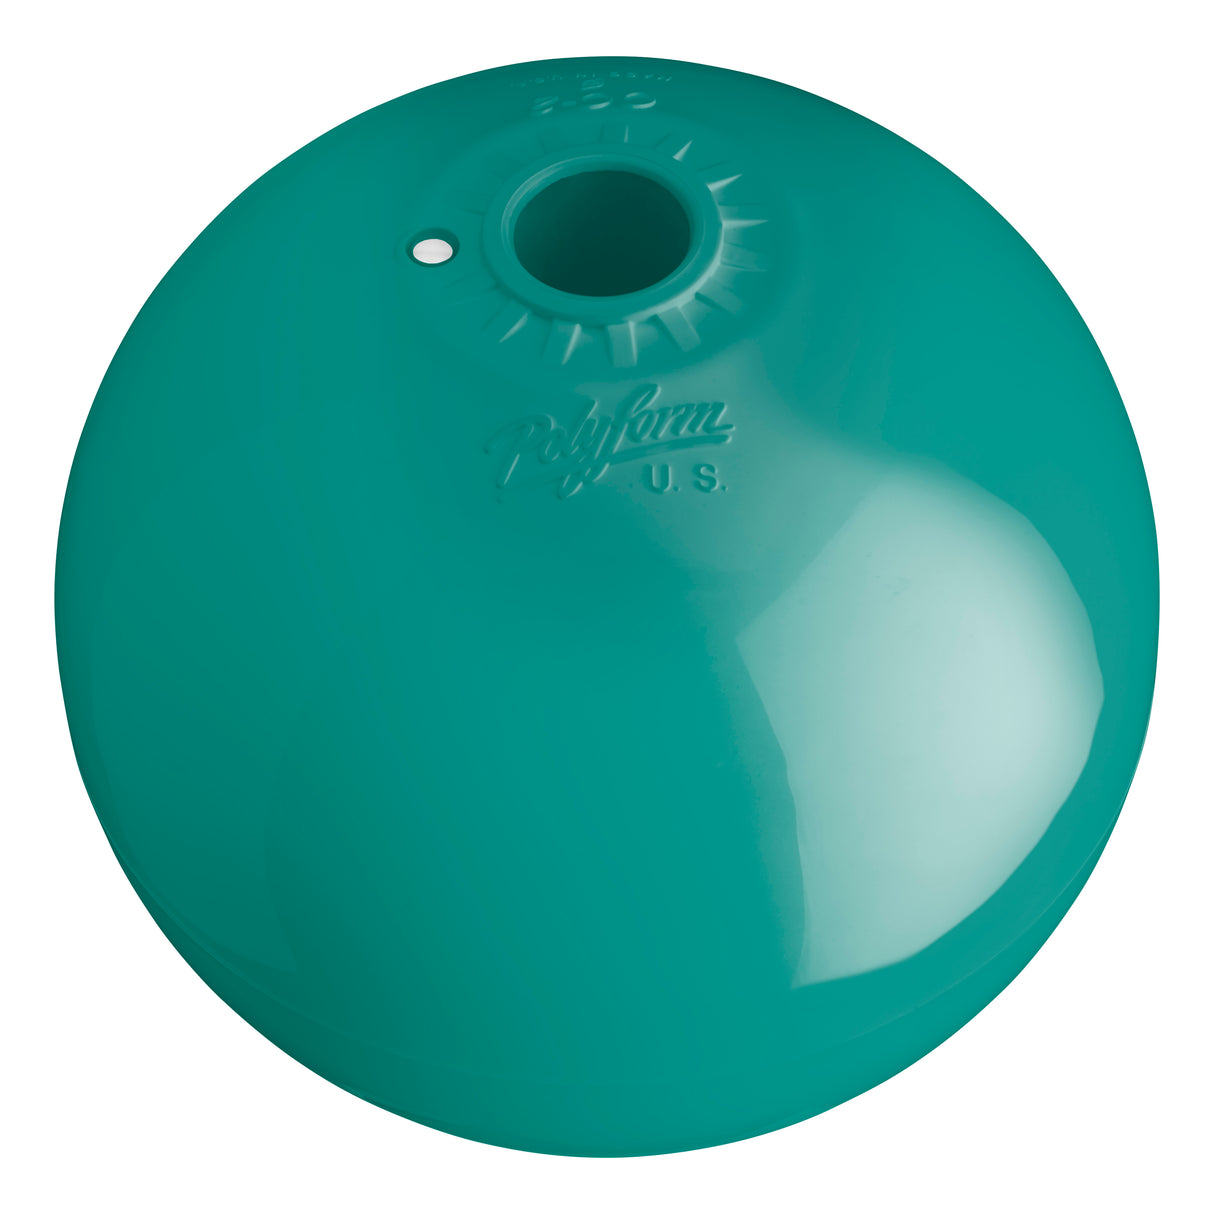 Hole through center mooring and marker buoy, Polyform CC-2 Teal angled shot